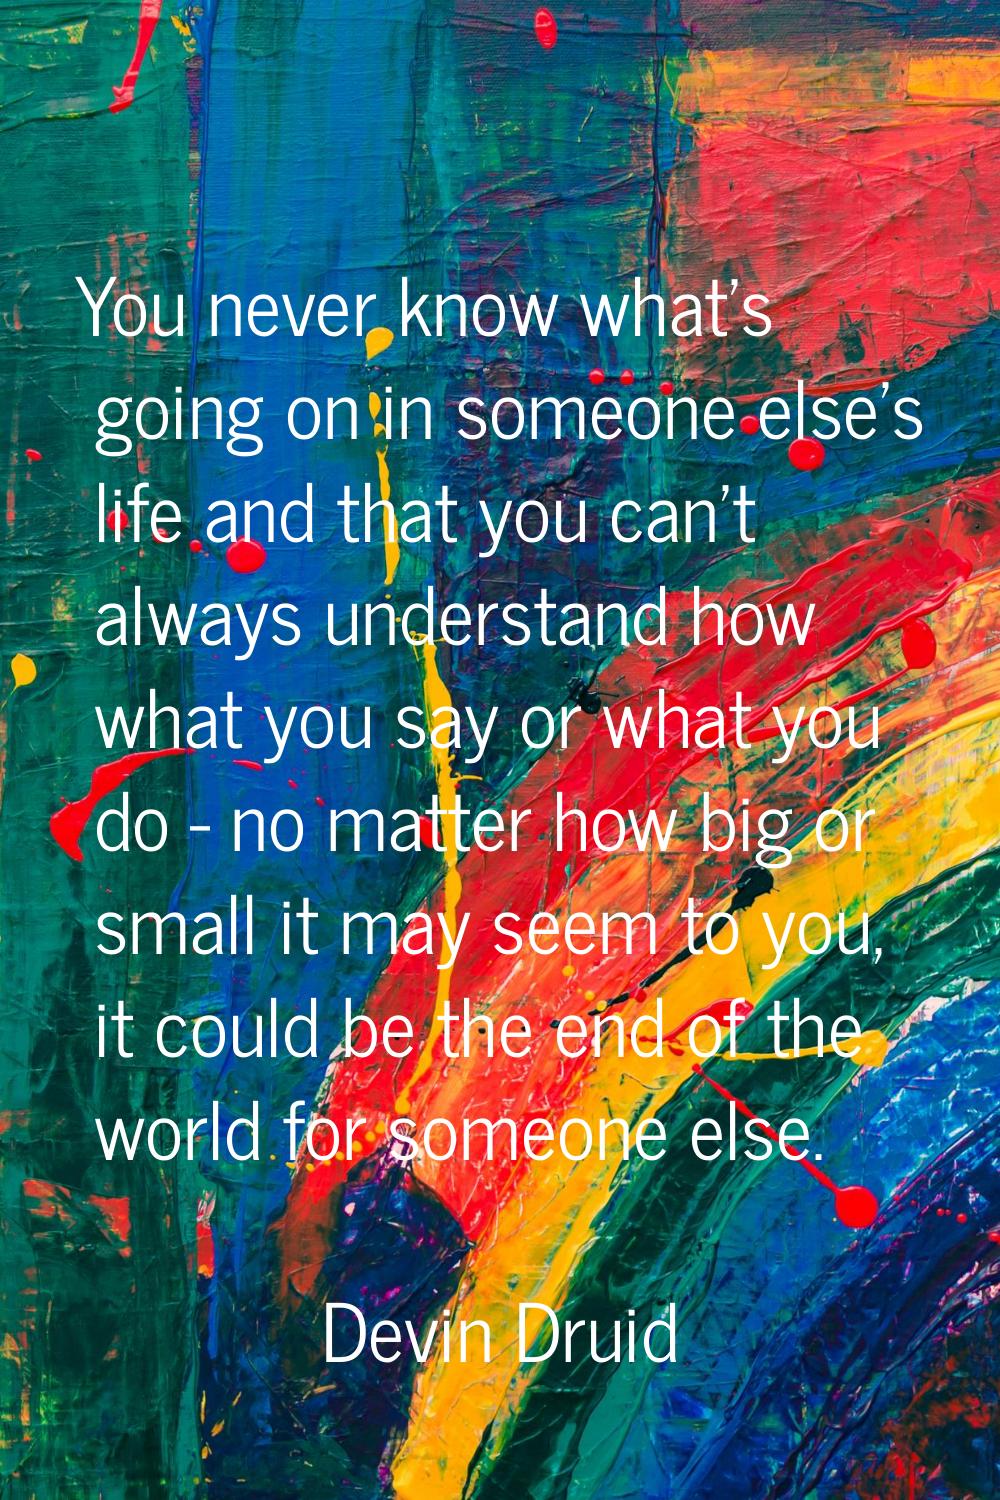 You never know what's going on in someone else's life and that you can't always understand how what